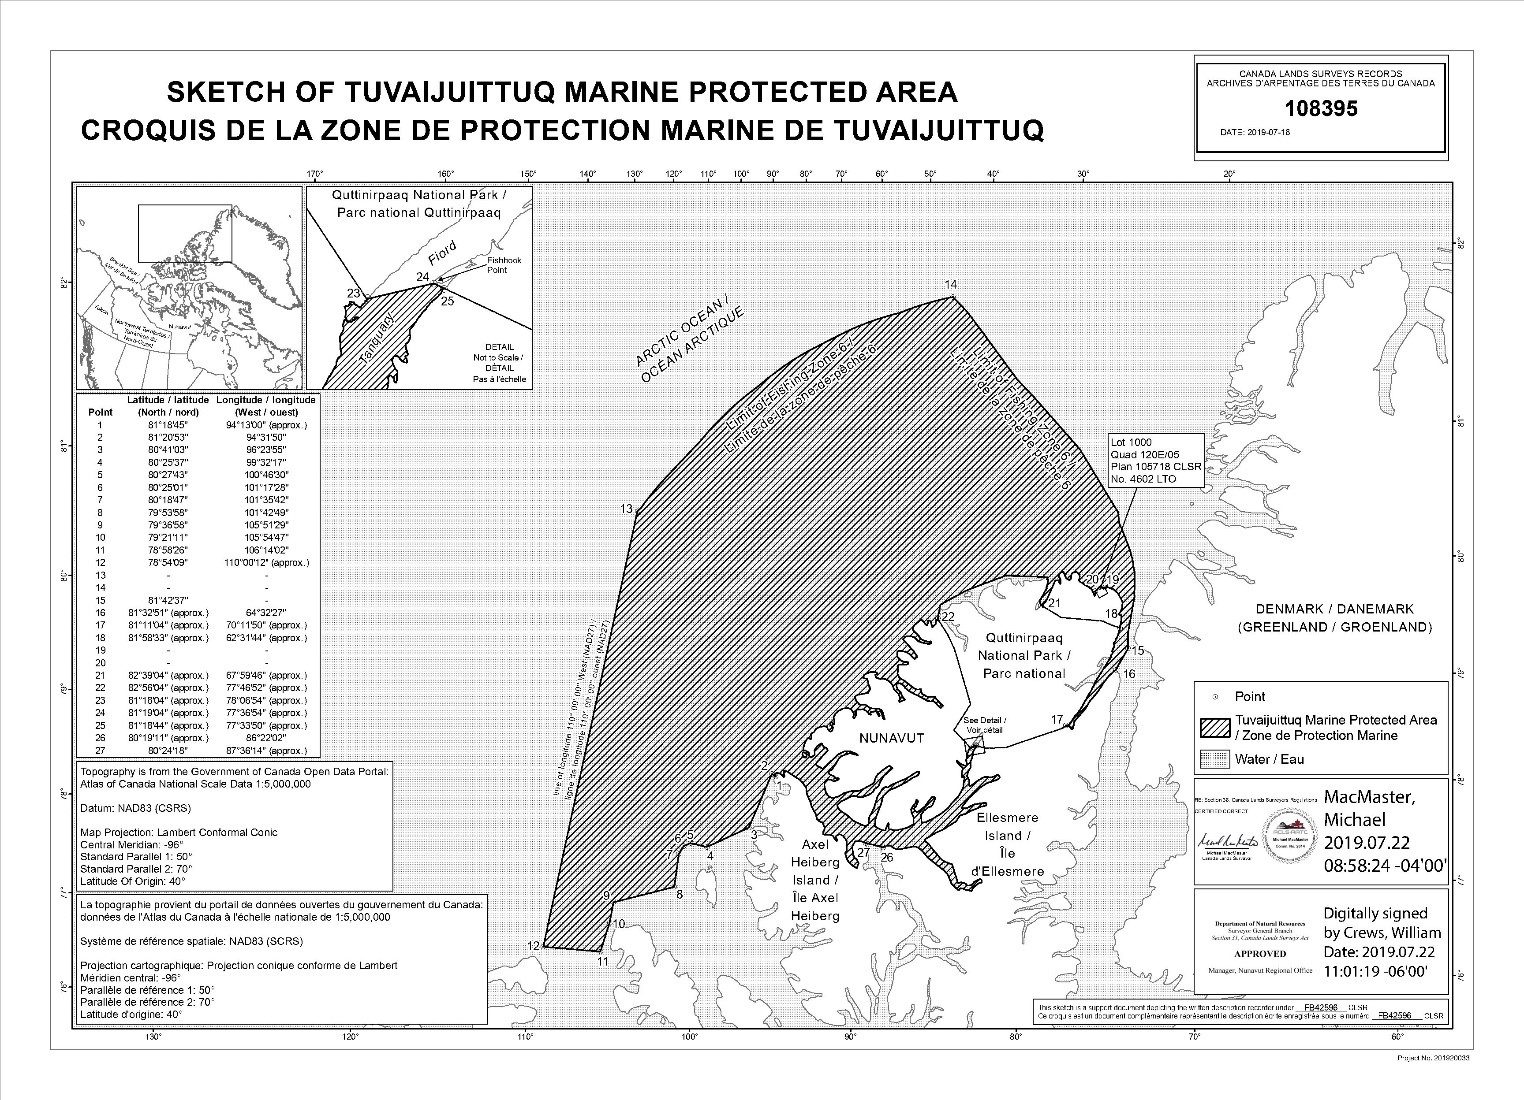 Map of the Tuvaijuittuq Marine Protected Area depicted using black diagonal lines. The coordinates of the marine protected area can be found on the left side. 